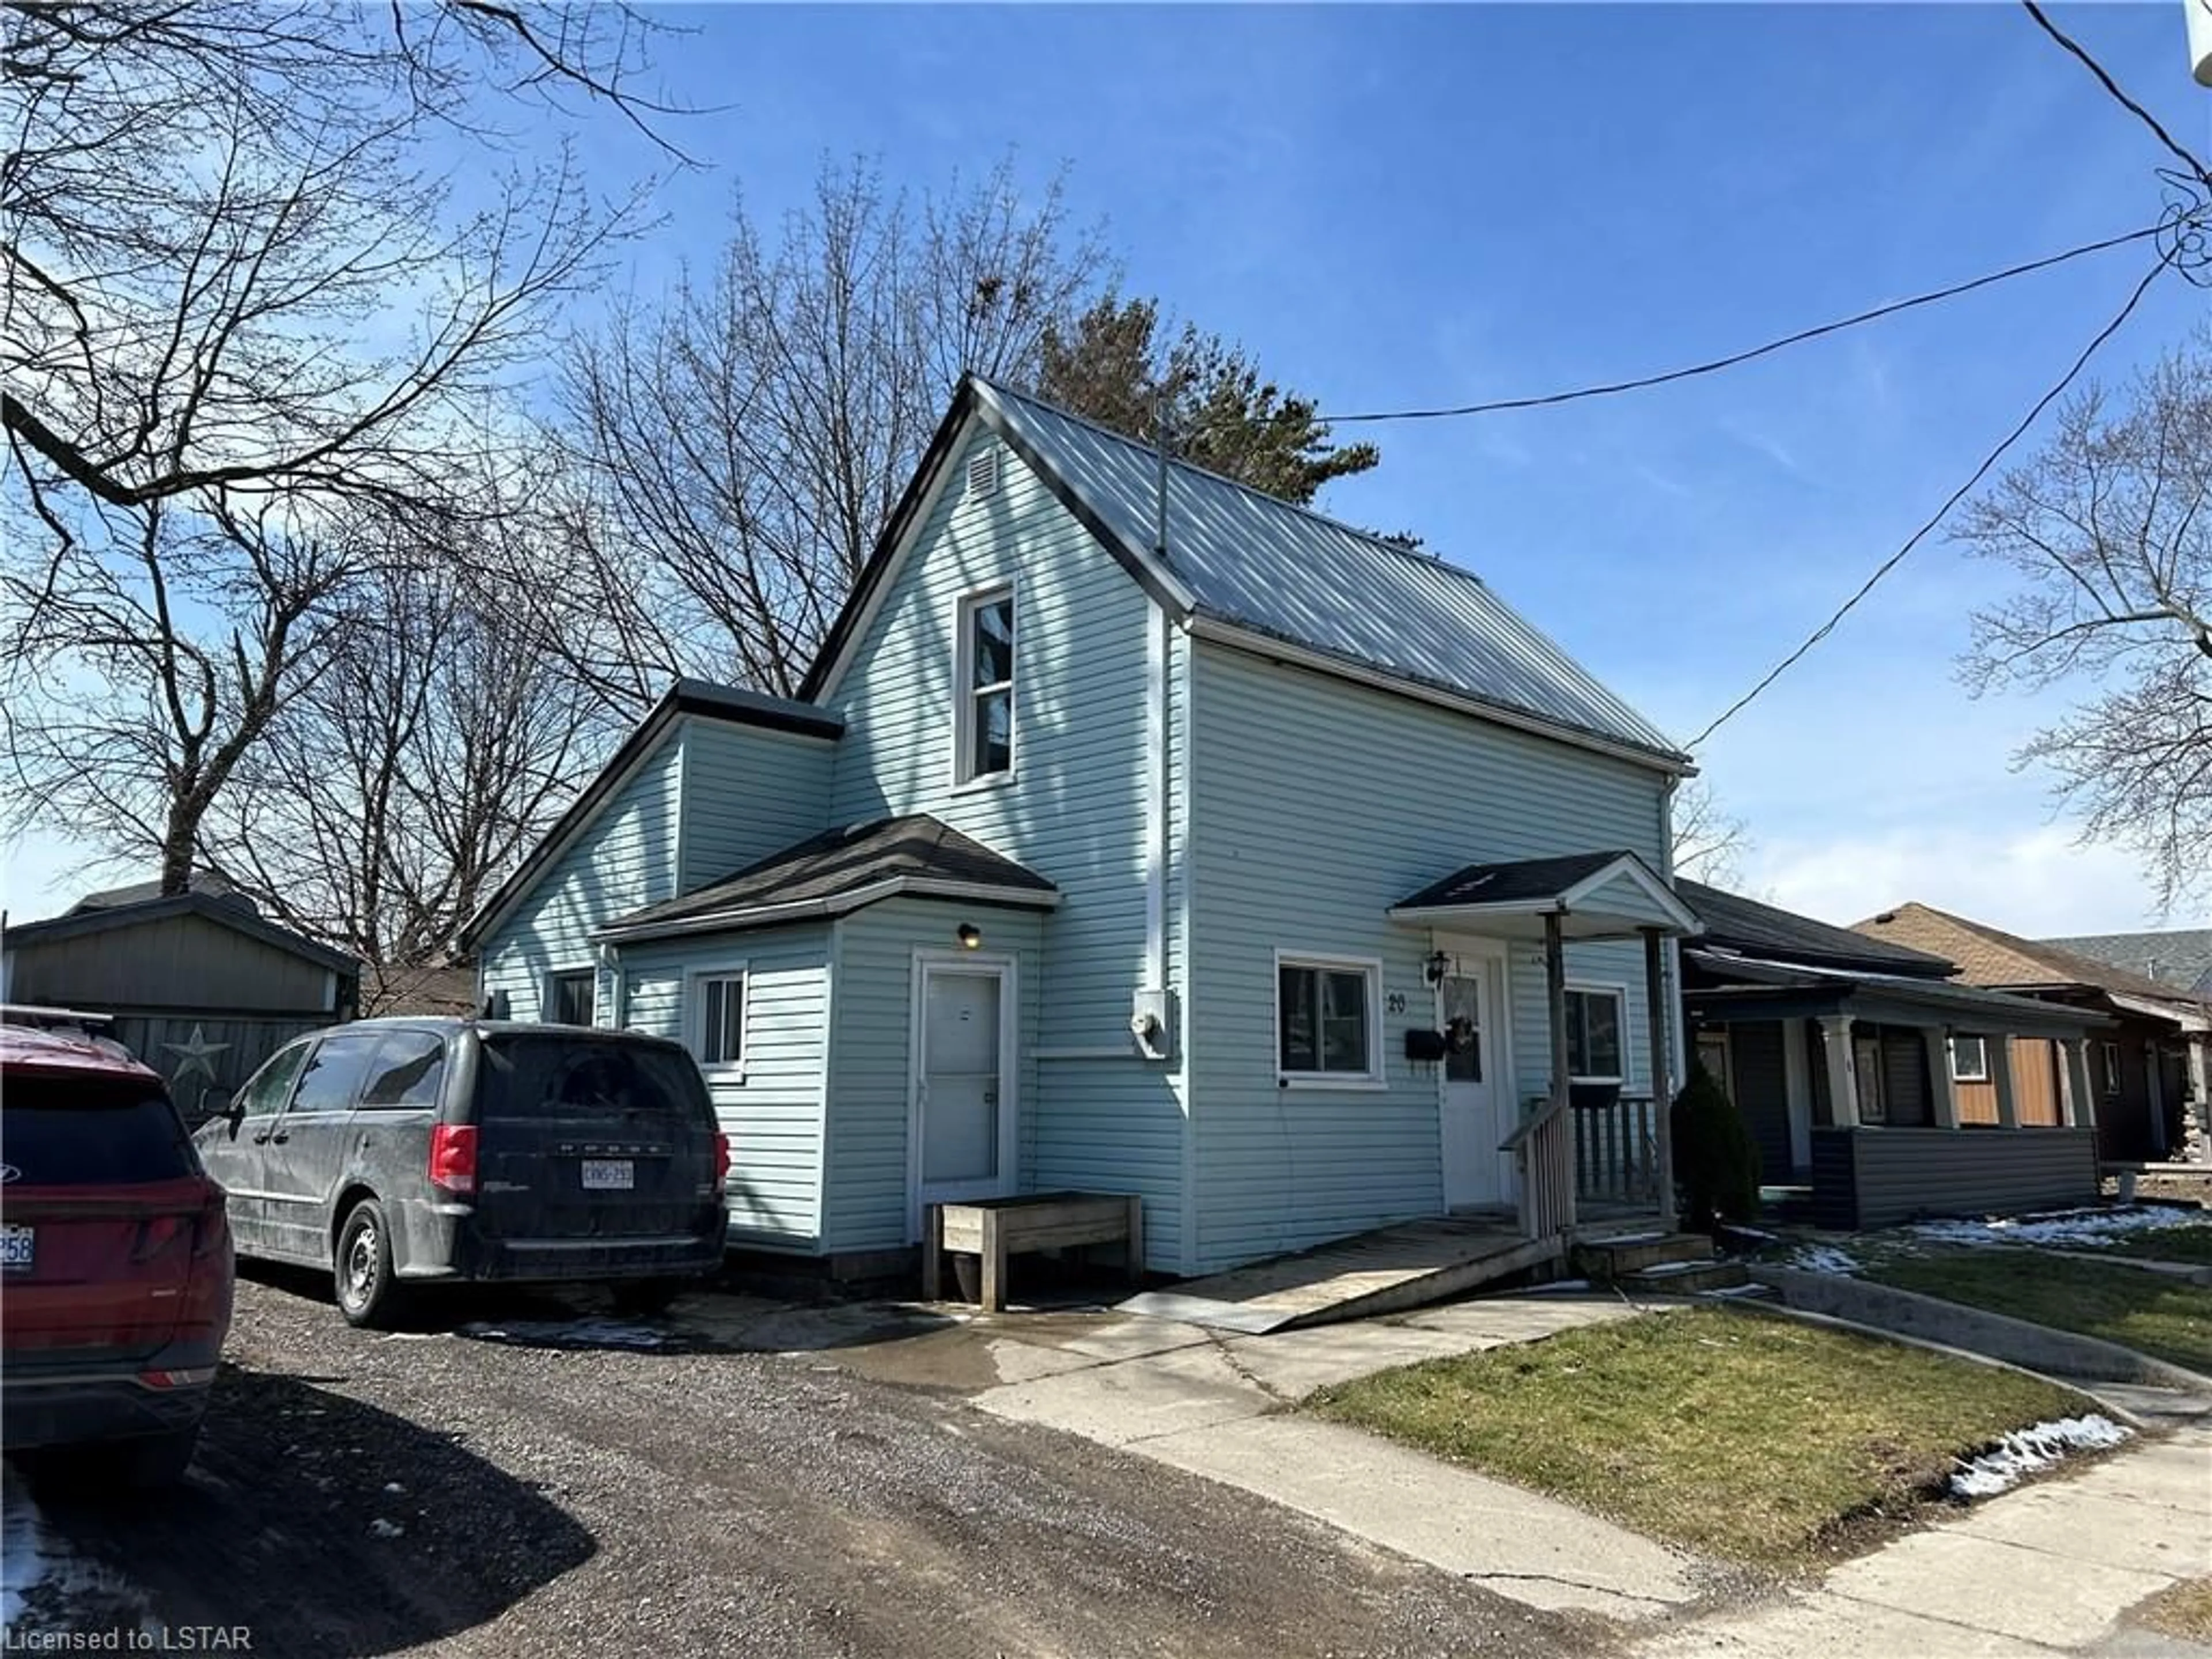 Home with unknown exterior material for 20 Meda St, St. Thomas Ontario N5P 1W5